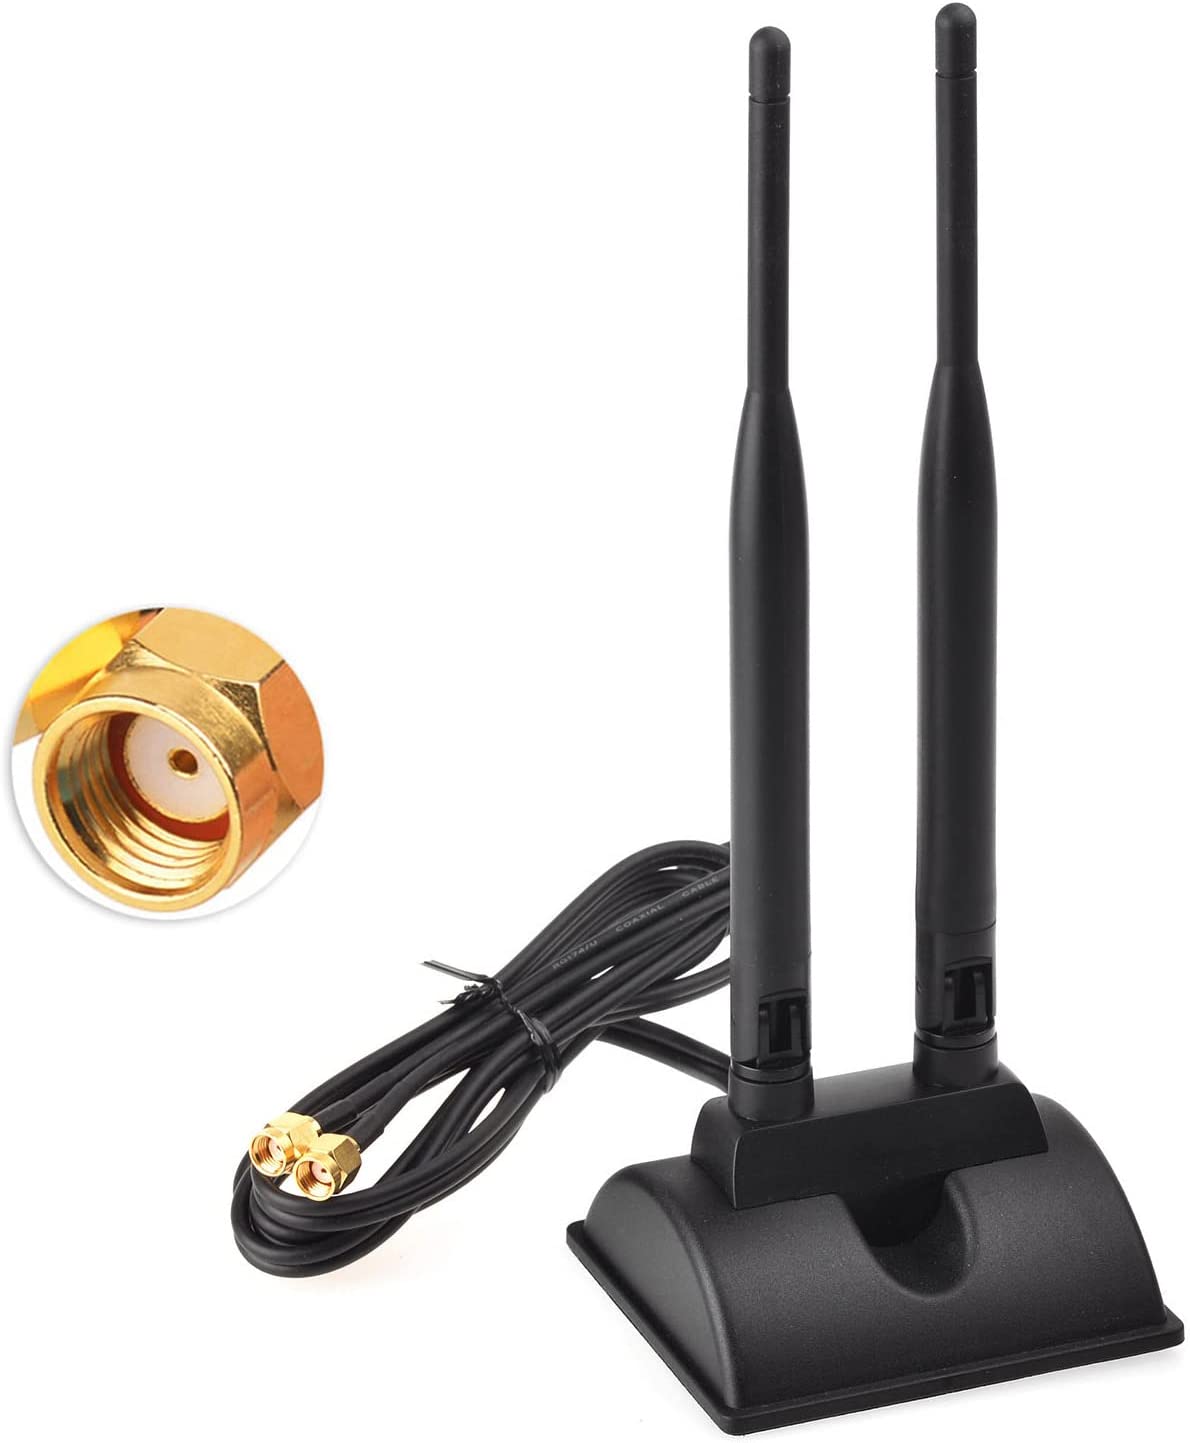 Eightwood Dual WiFi Antenna with RP-SMA Male [...]